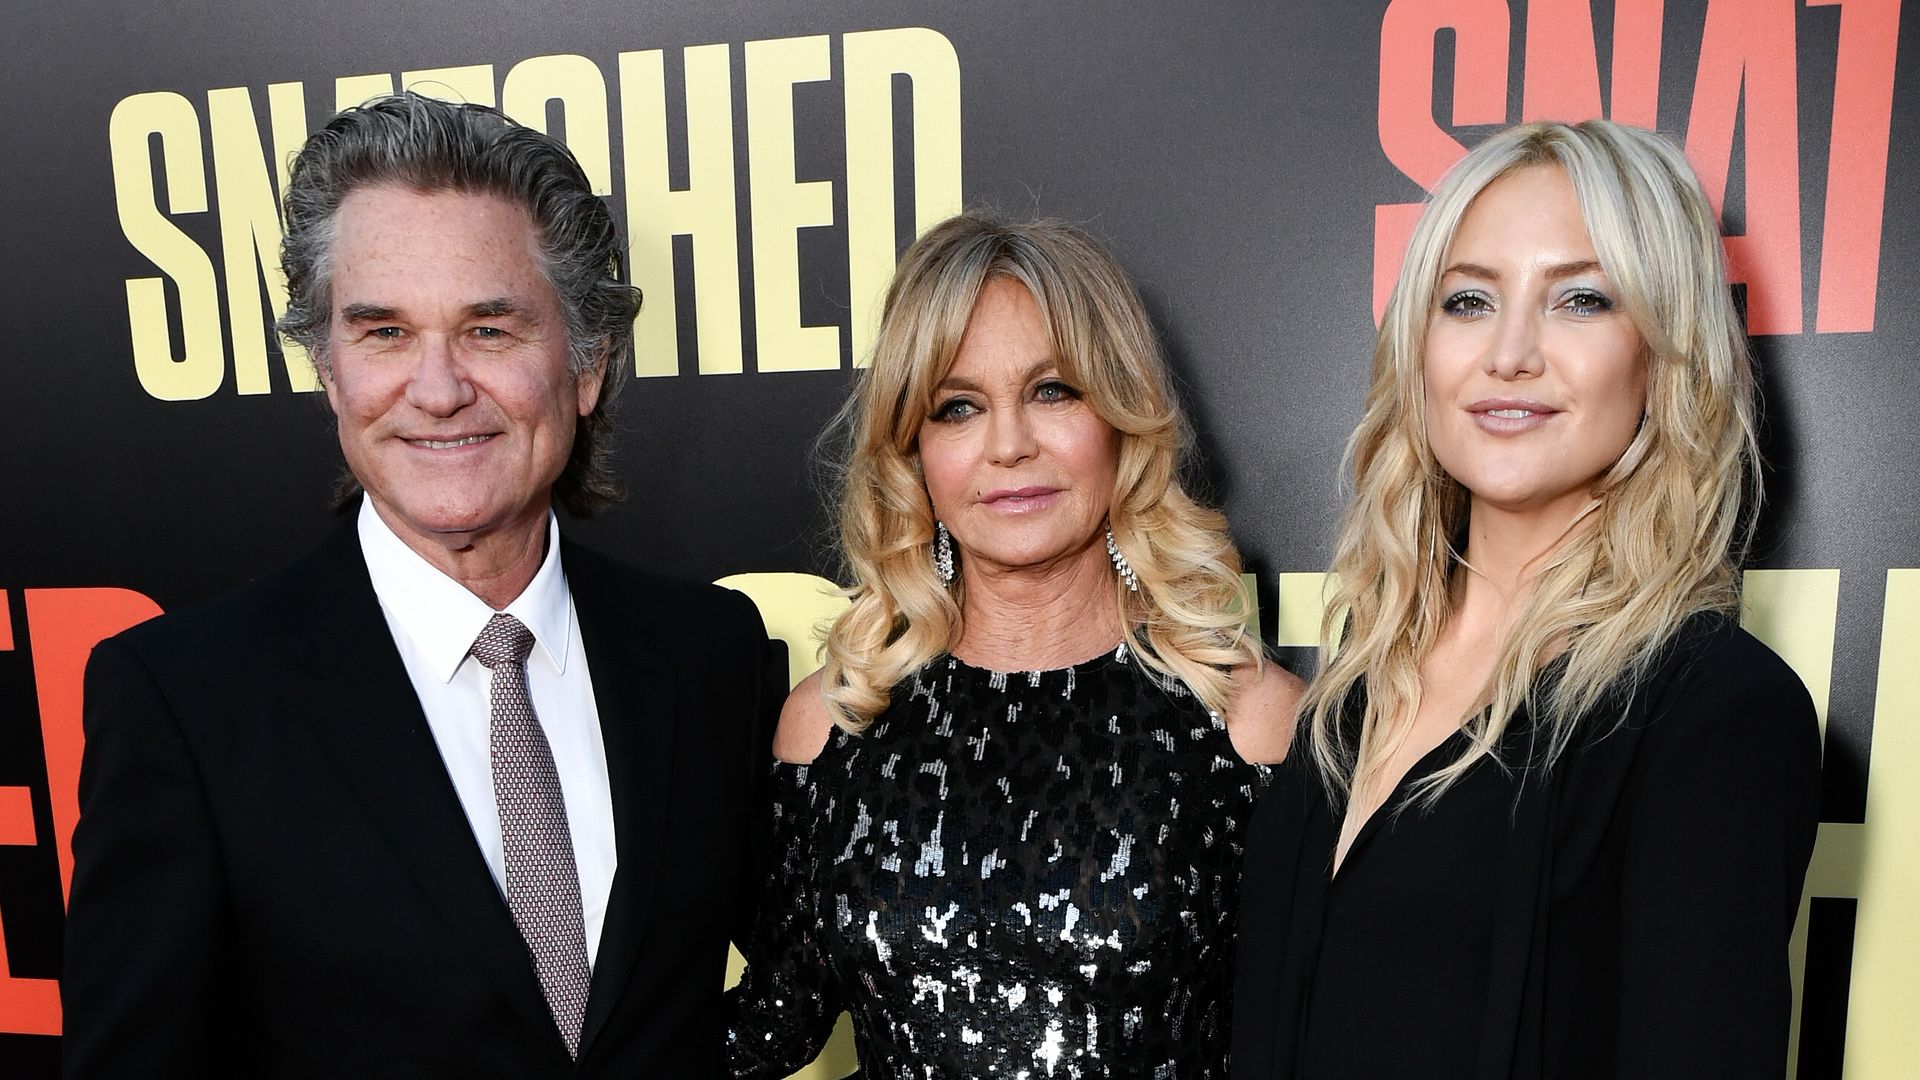 Kurt Russell, Goldie Hawn and Kate Hudson at the 'Snatched' film premiere, Los Angeles, 10 May 2017